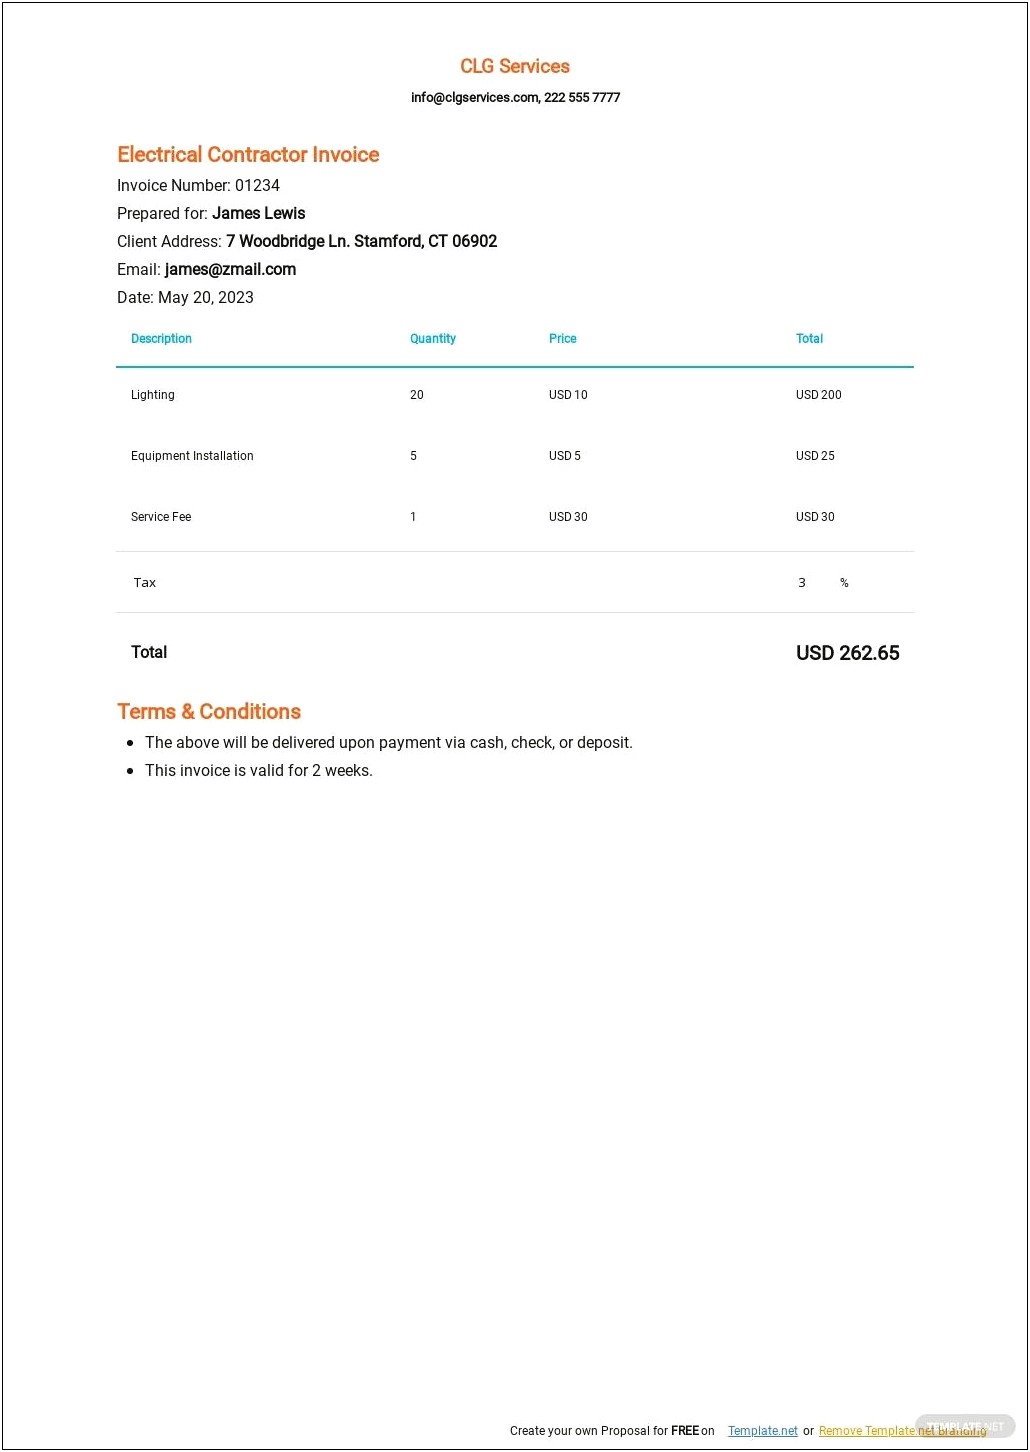 Google Docs Template For An Invoice Download